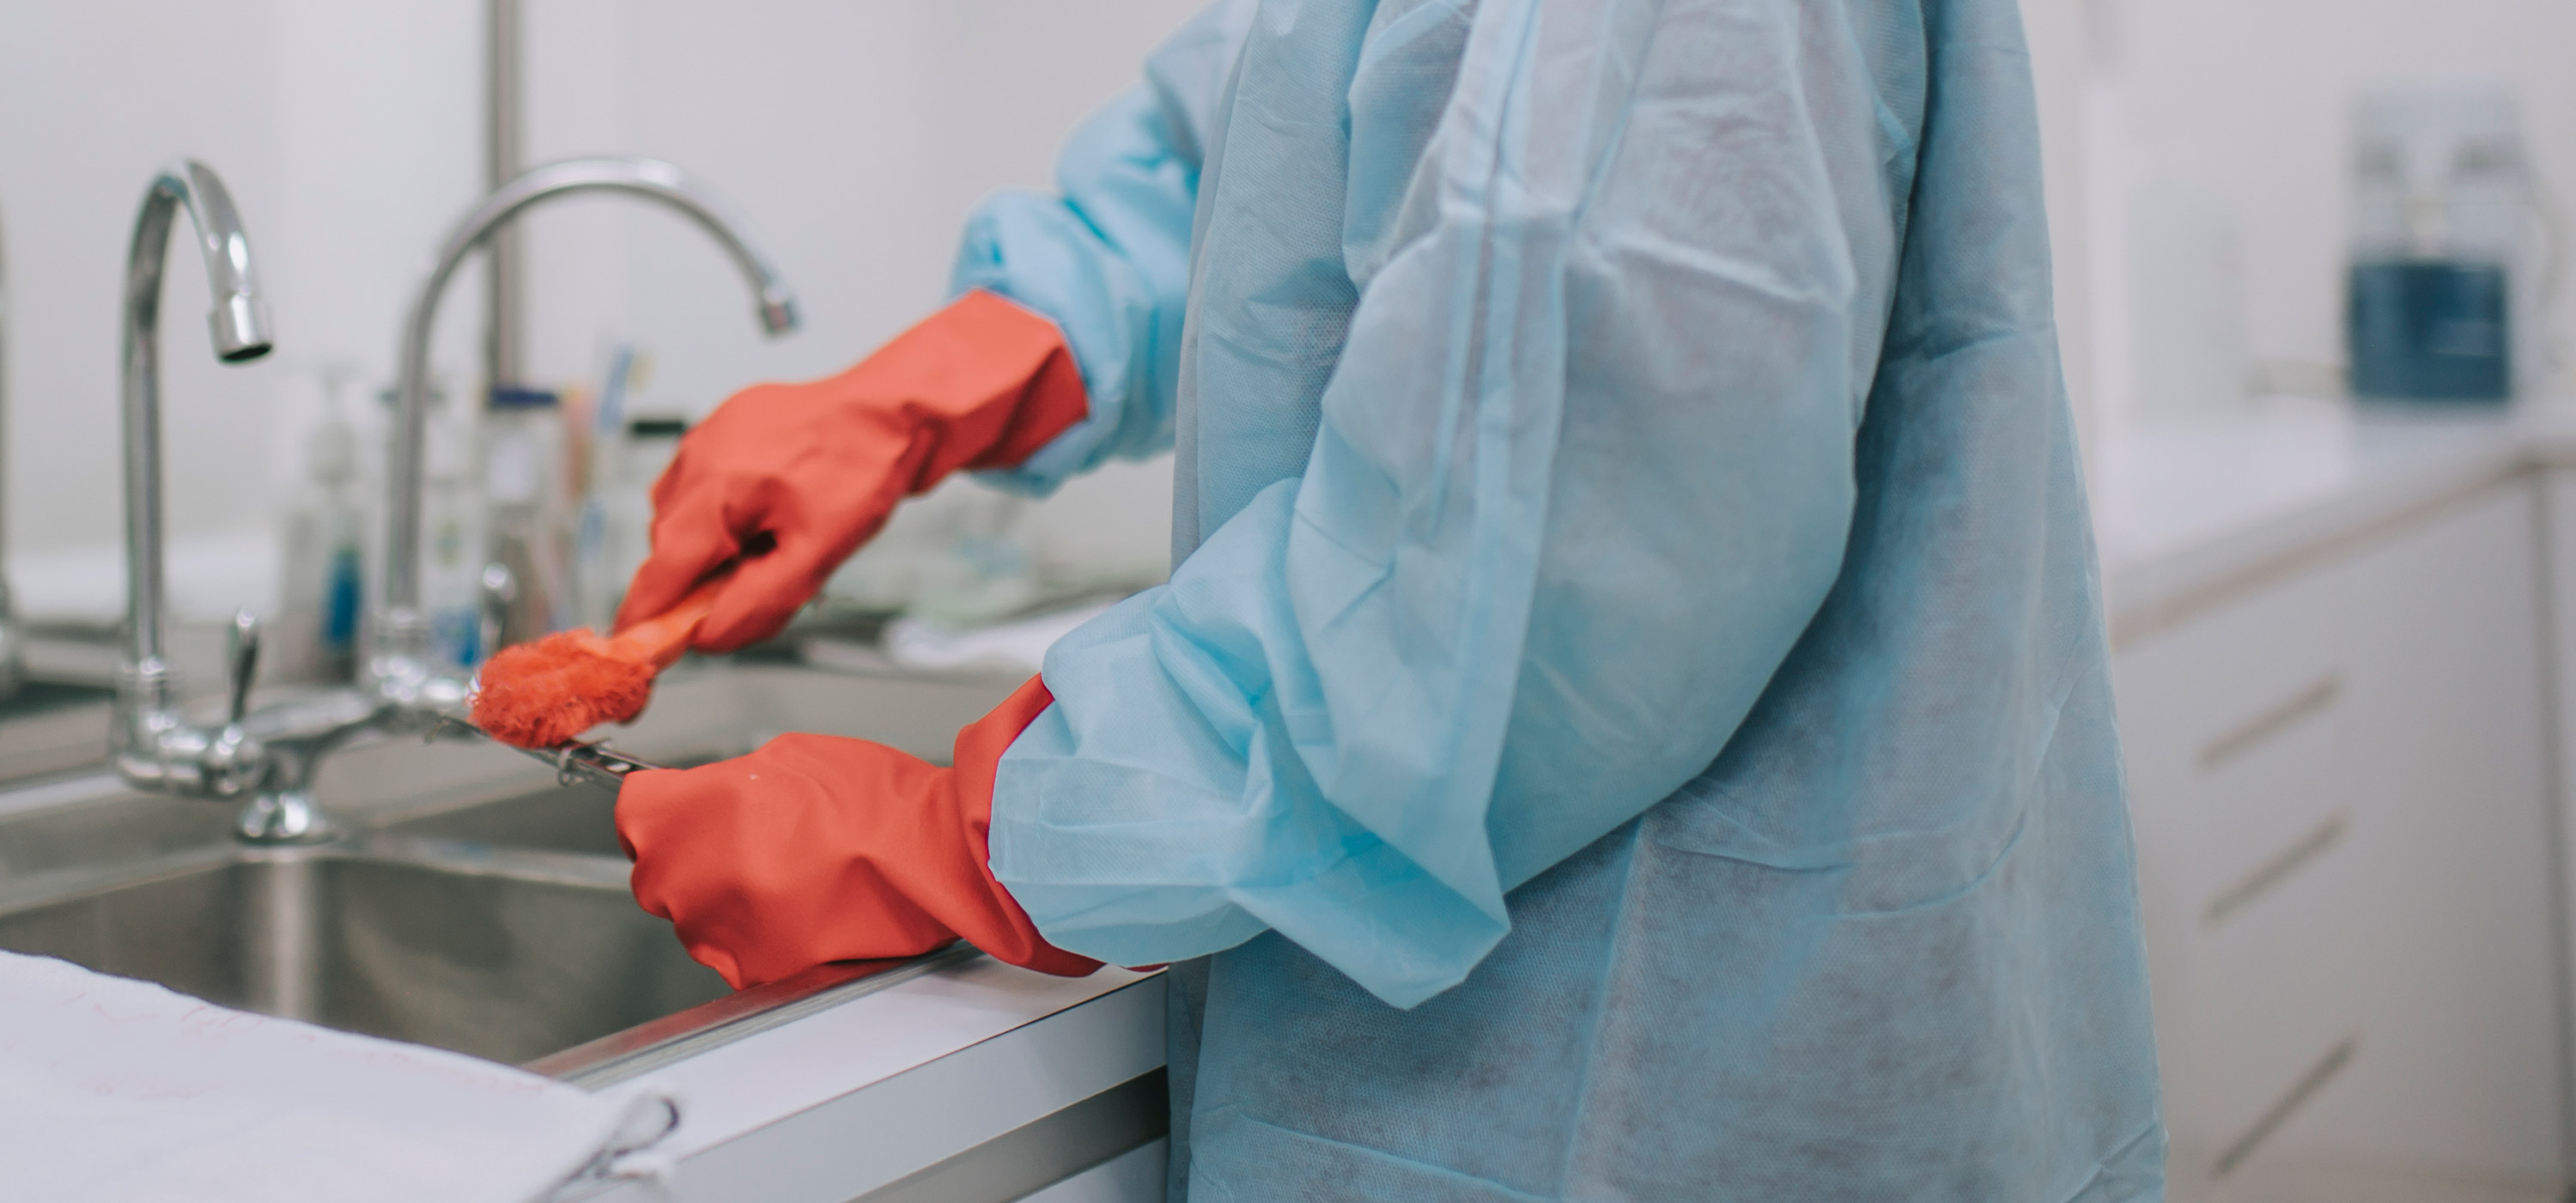 More safety precautions needed in sterile processing departments based on splash study.